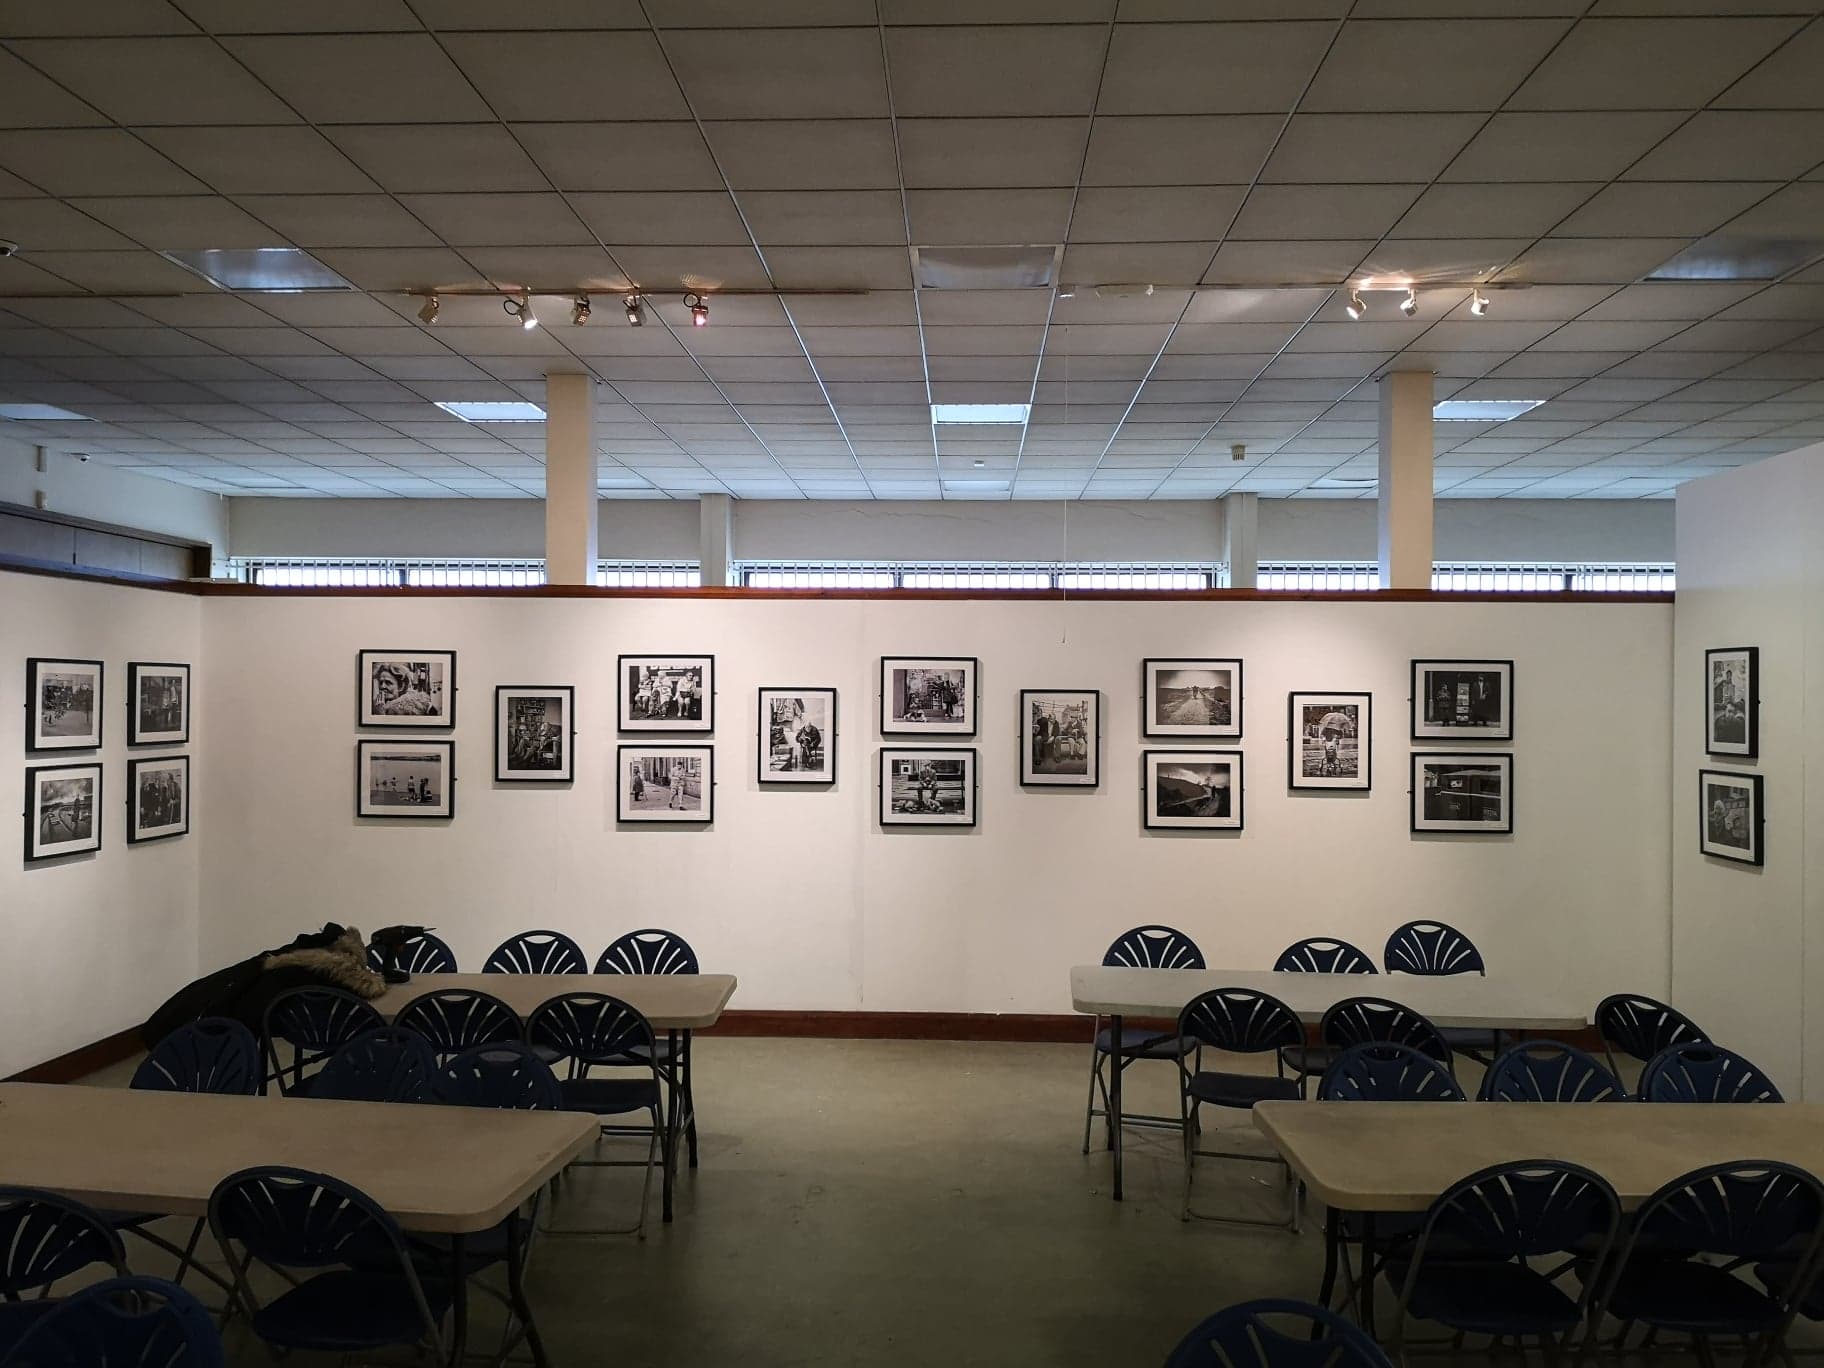 A room with tables and chairs adorned with framed street photographs.